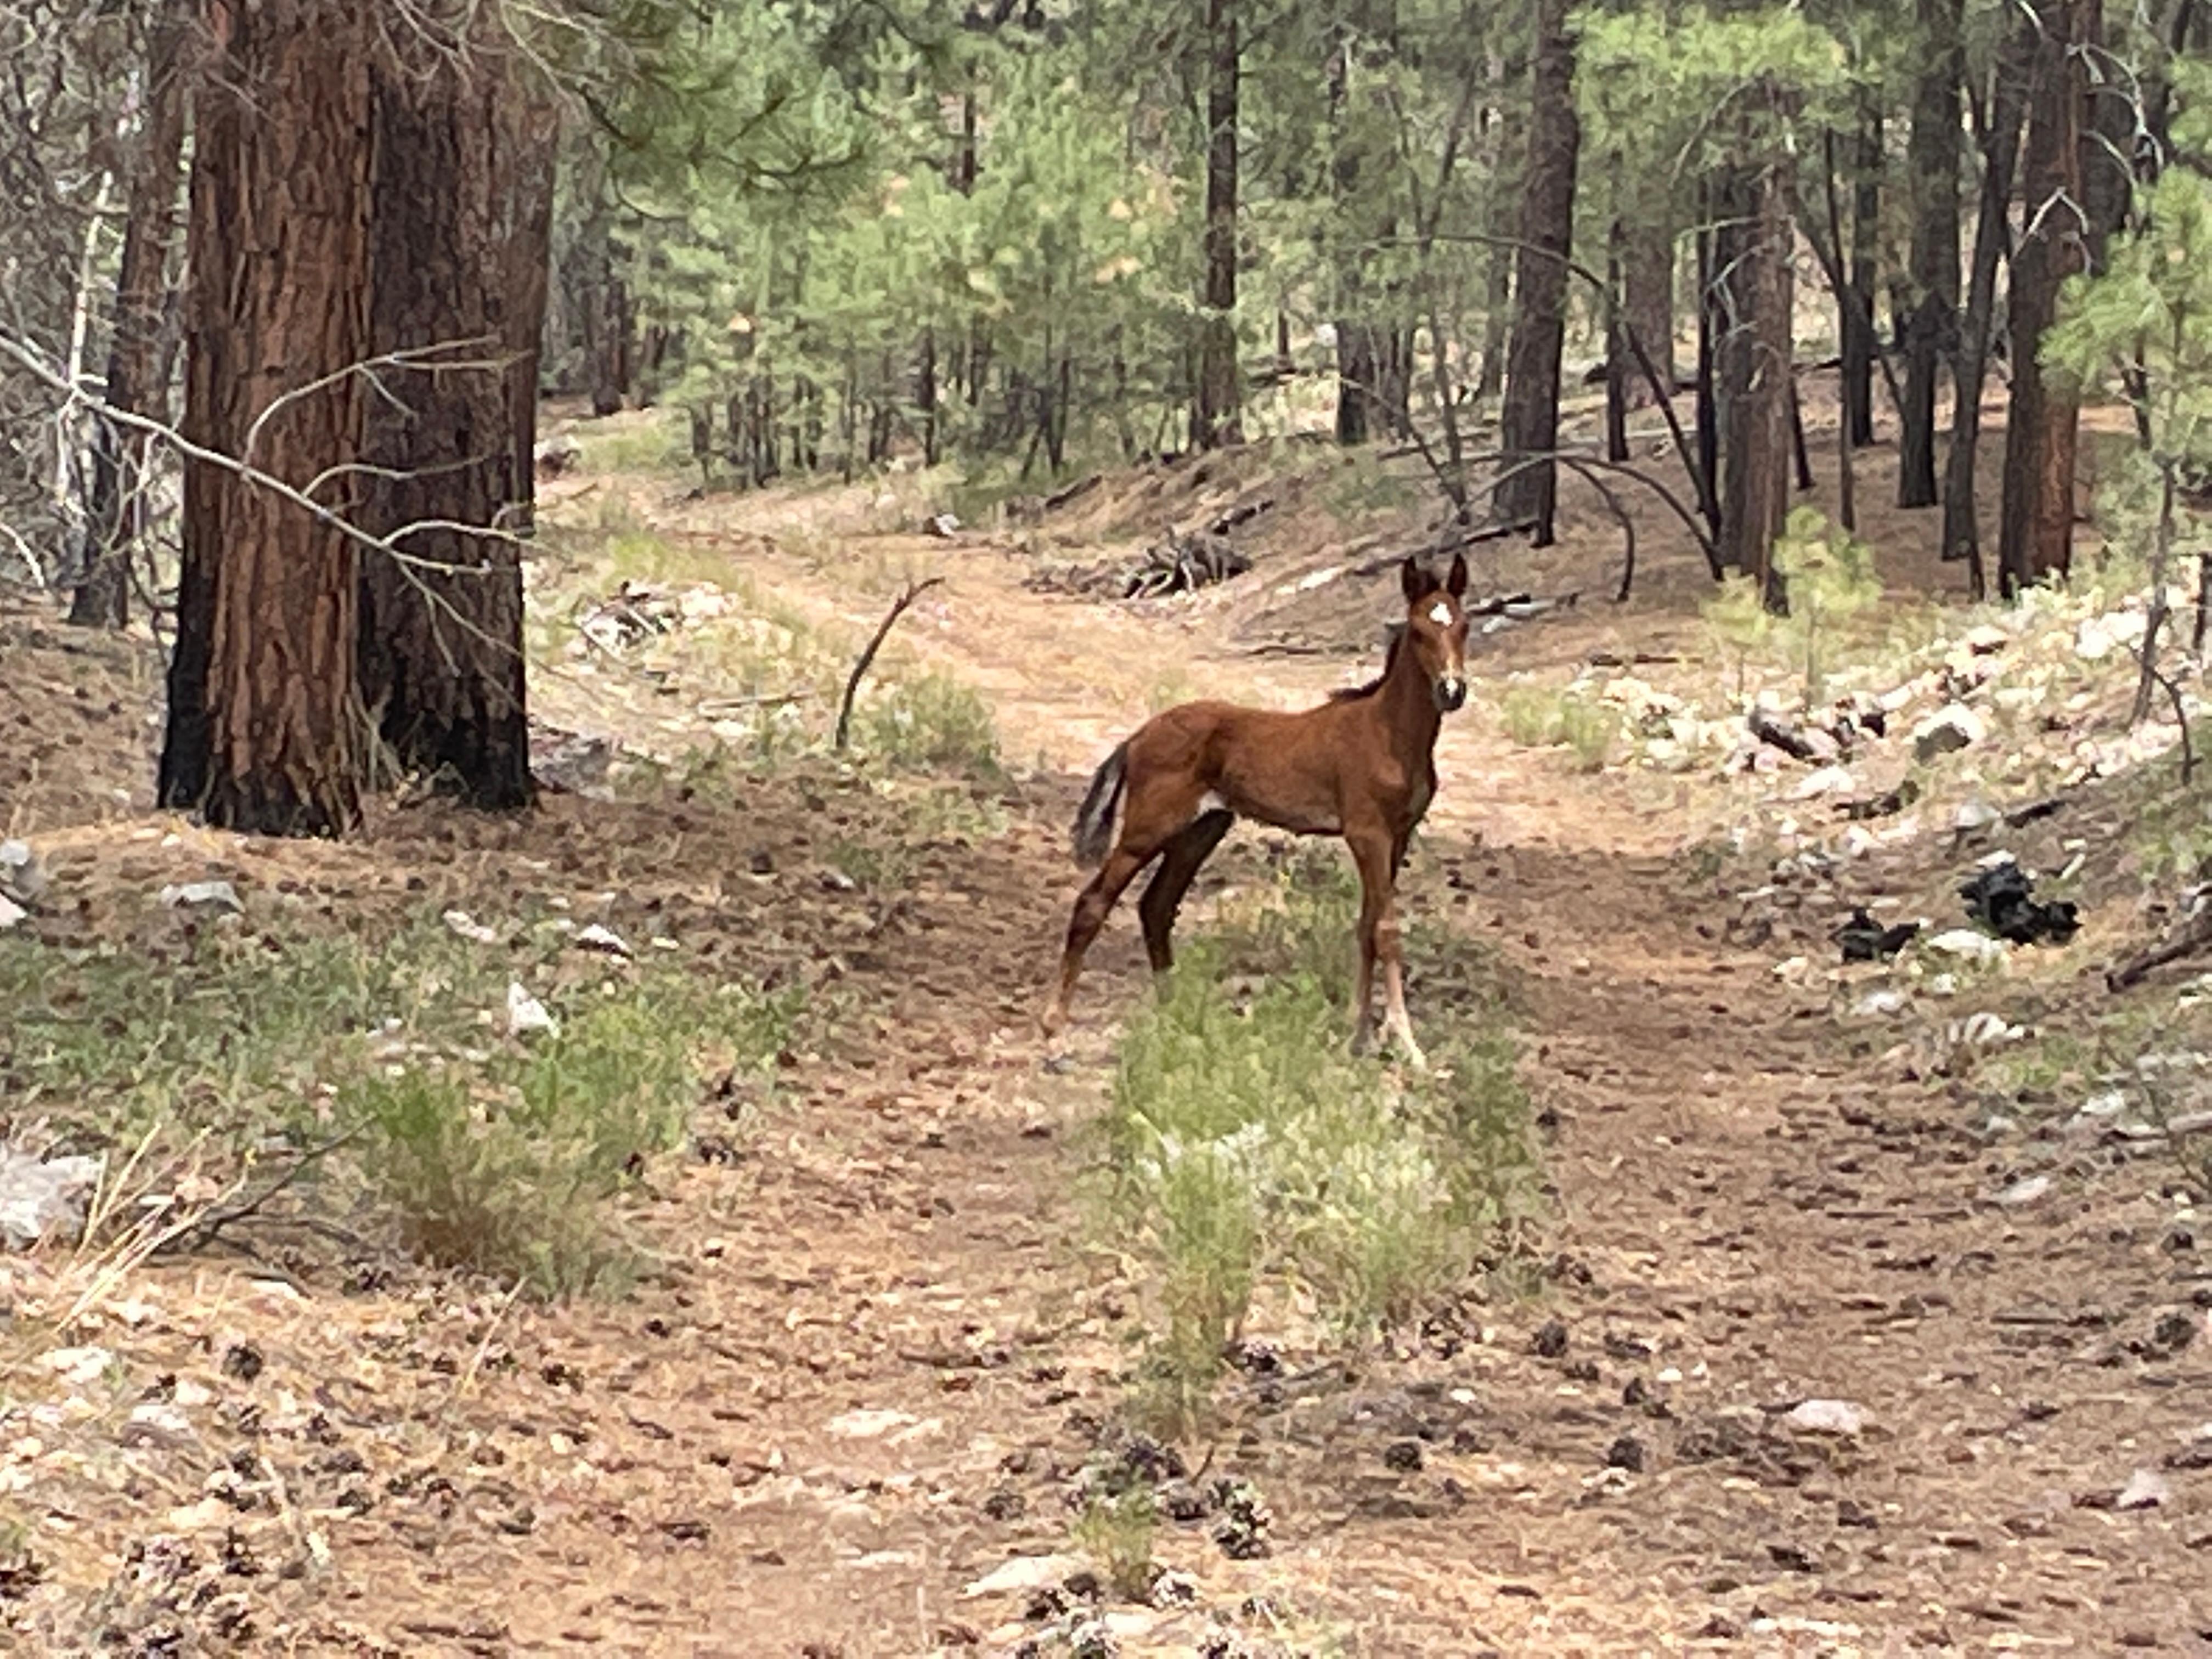 Colt standing for a photo brown colt in the forest 7-25-22